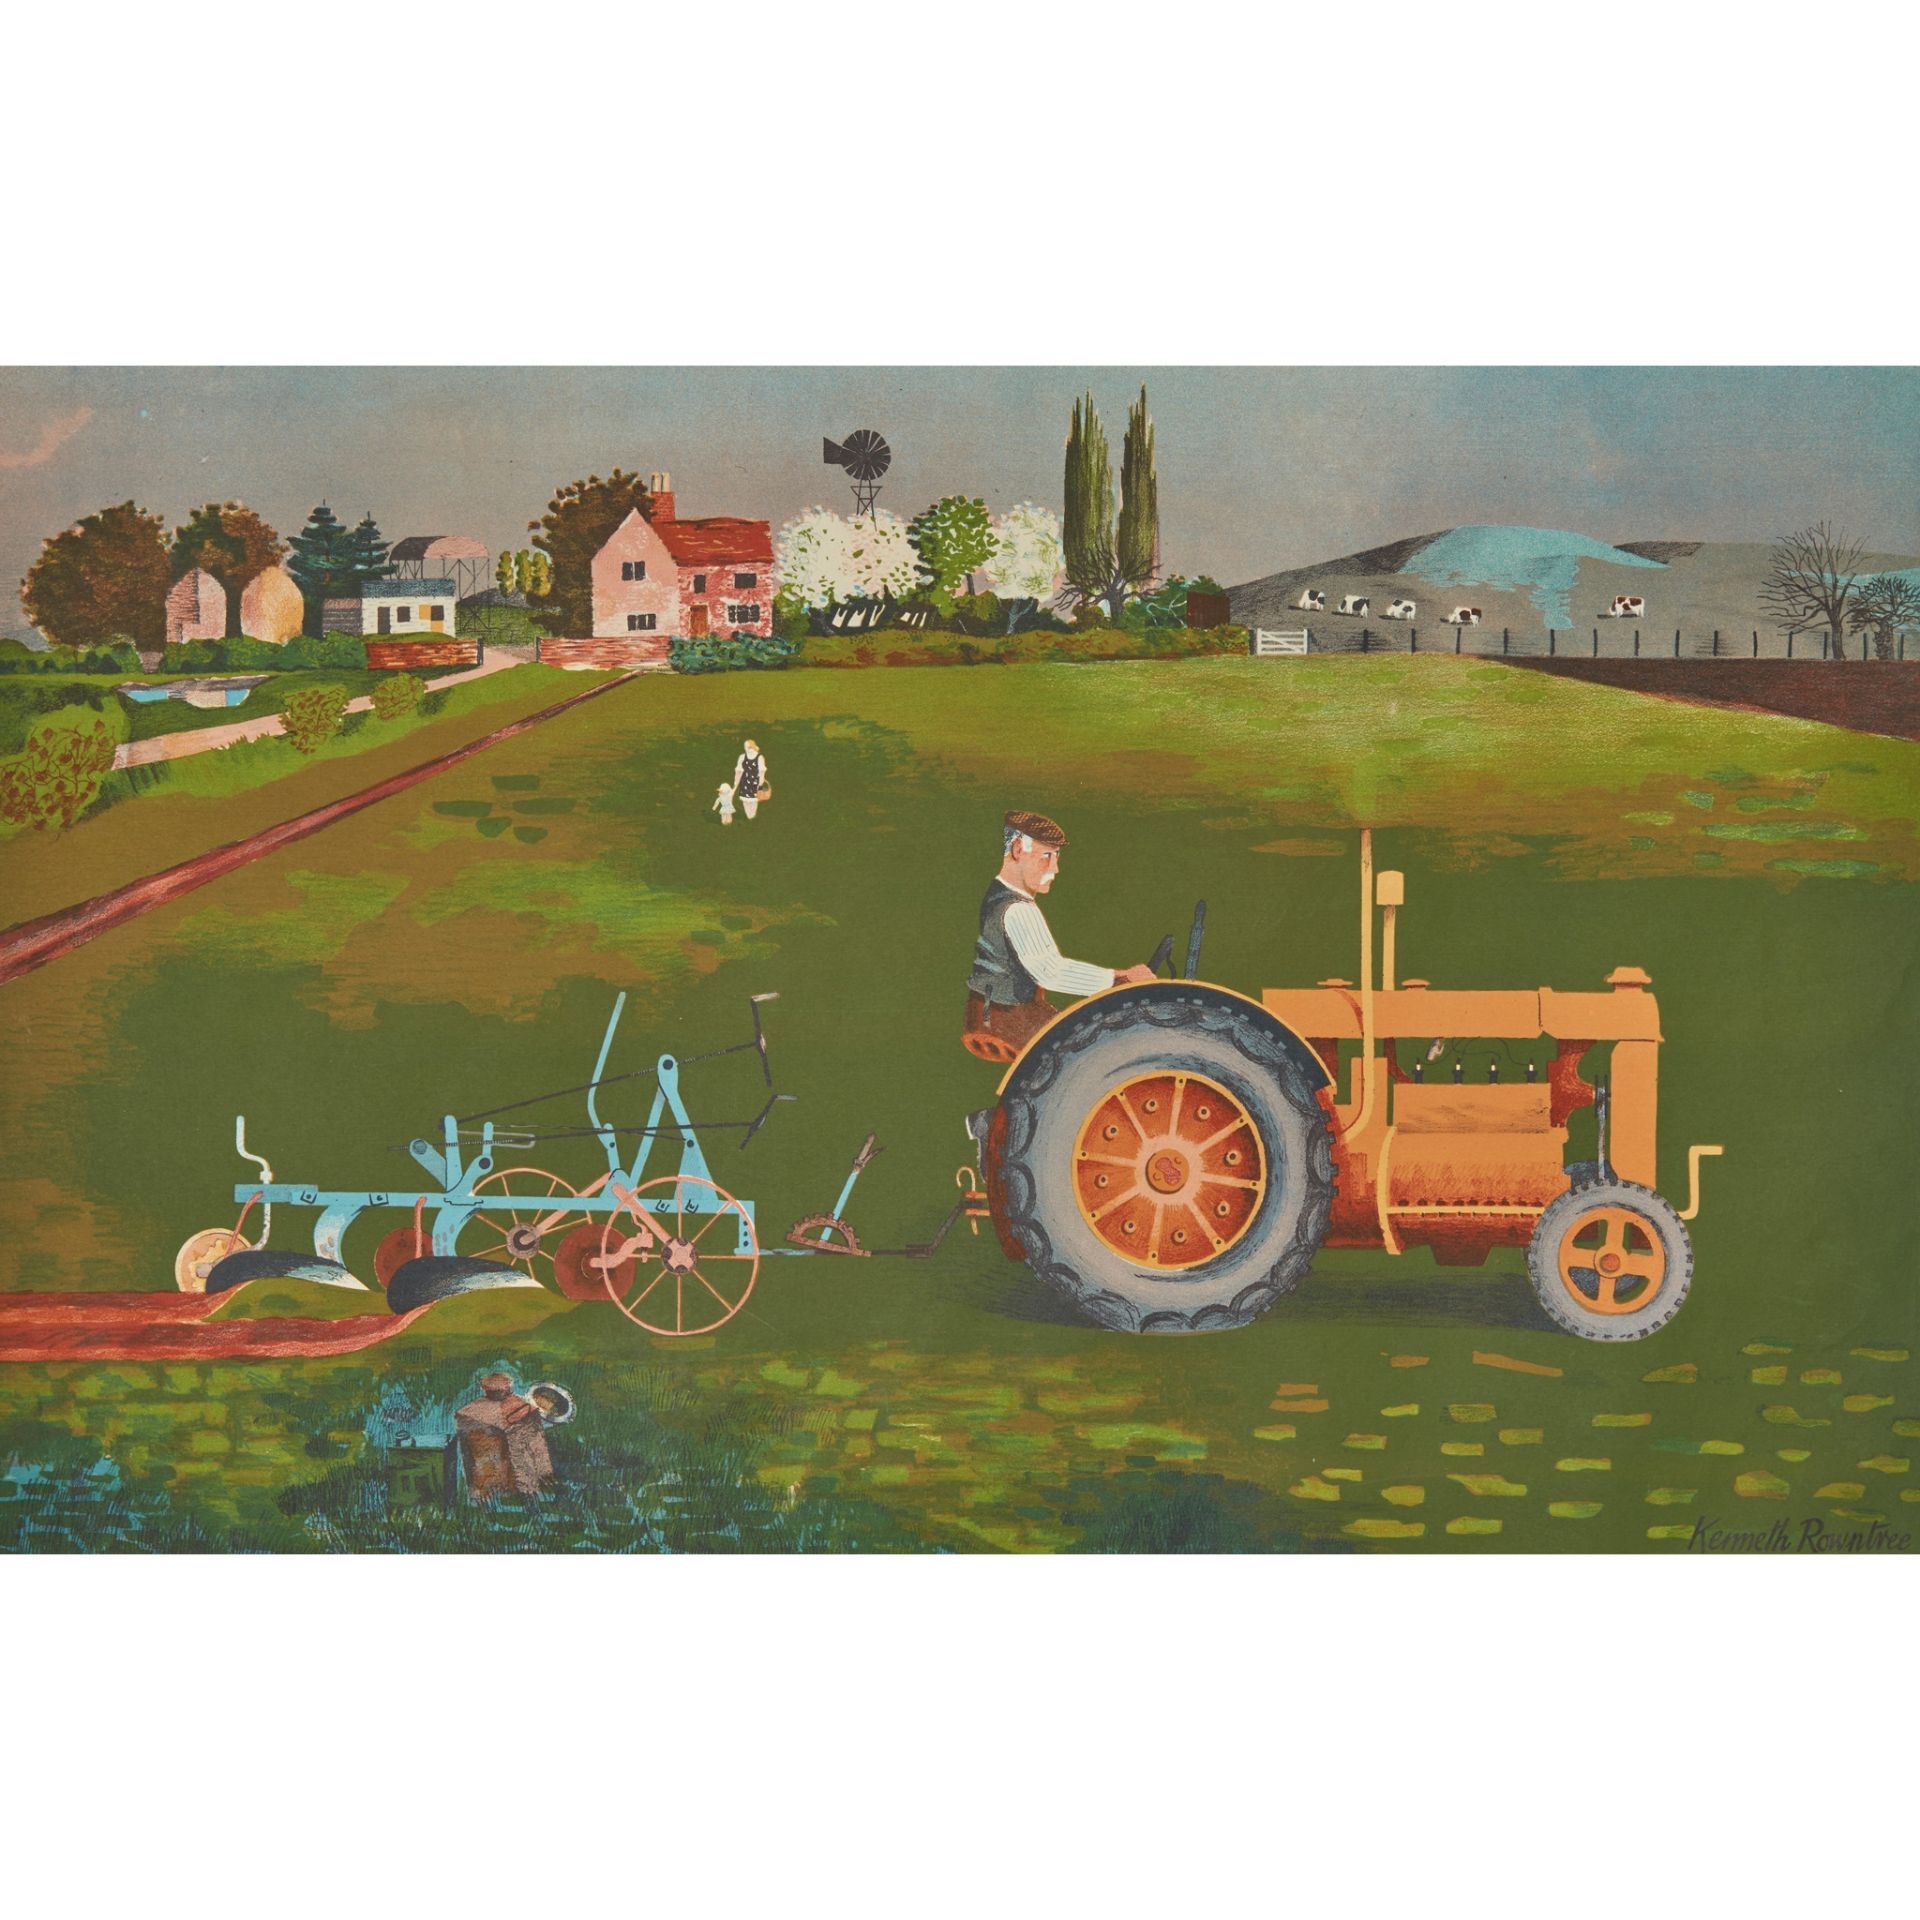 KENNETH ROWNTREE (1915-1997) FOR SCHOOL PRINTS LTD. TRACTOR IN LANDSCAPE, 1945 - Image 4 of 6